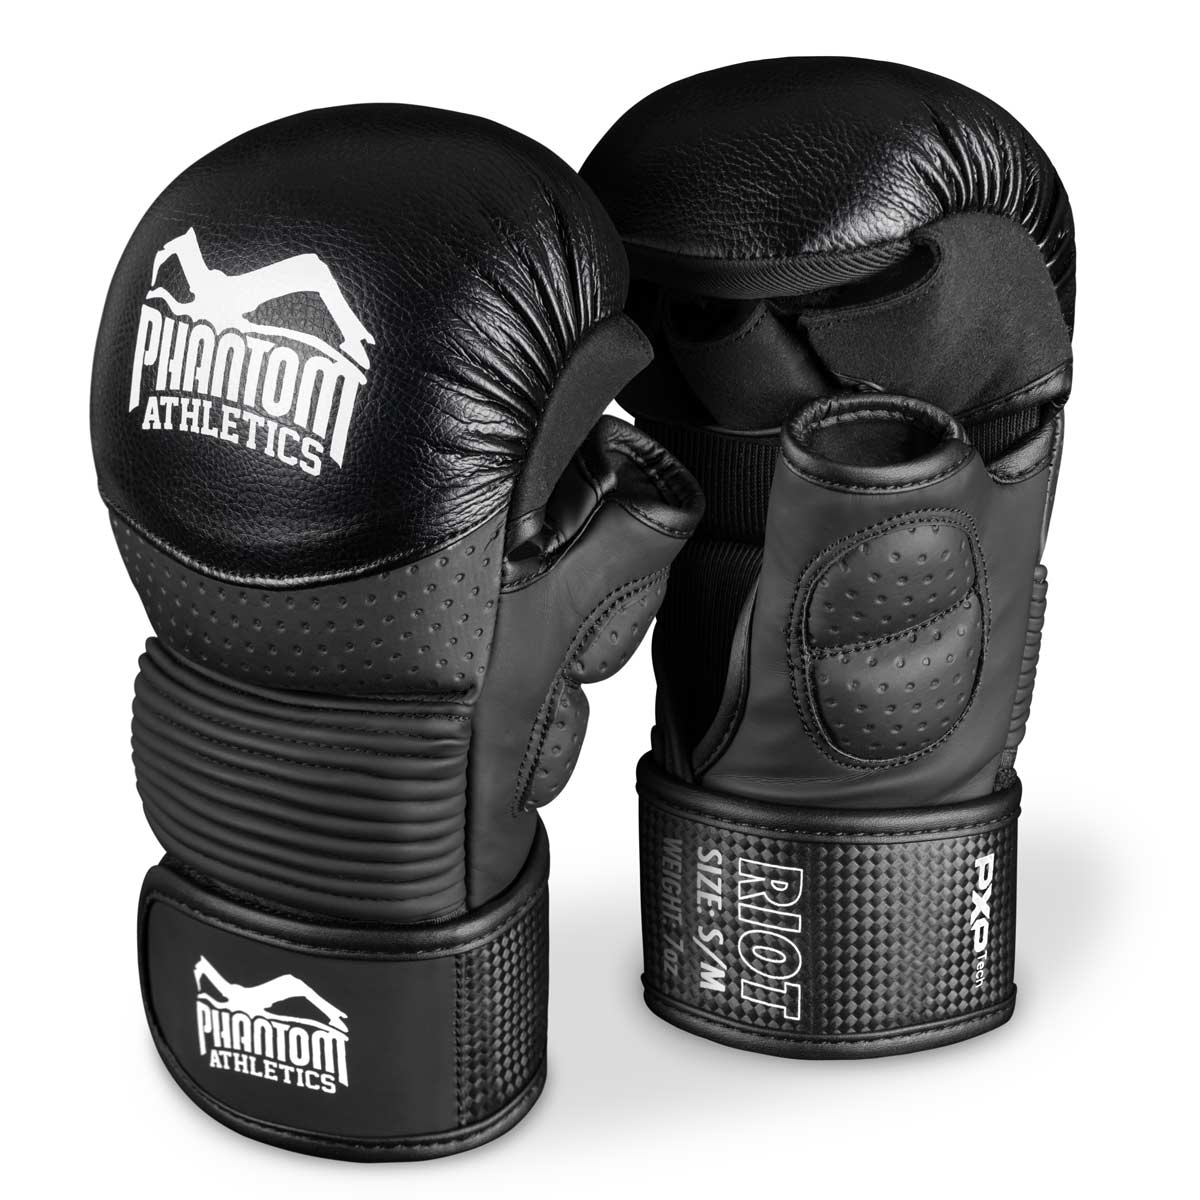 The Phantom RIOT PRO MMA sparring gloves. Ideal for your martial arts training and amateur competitions. The highest quality and safest MMA gloves on the market. Perfect fit and superior quality for training and sparring.